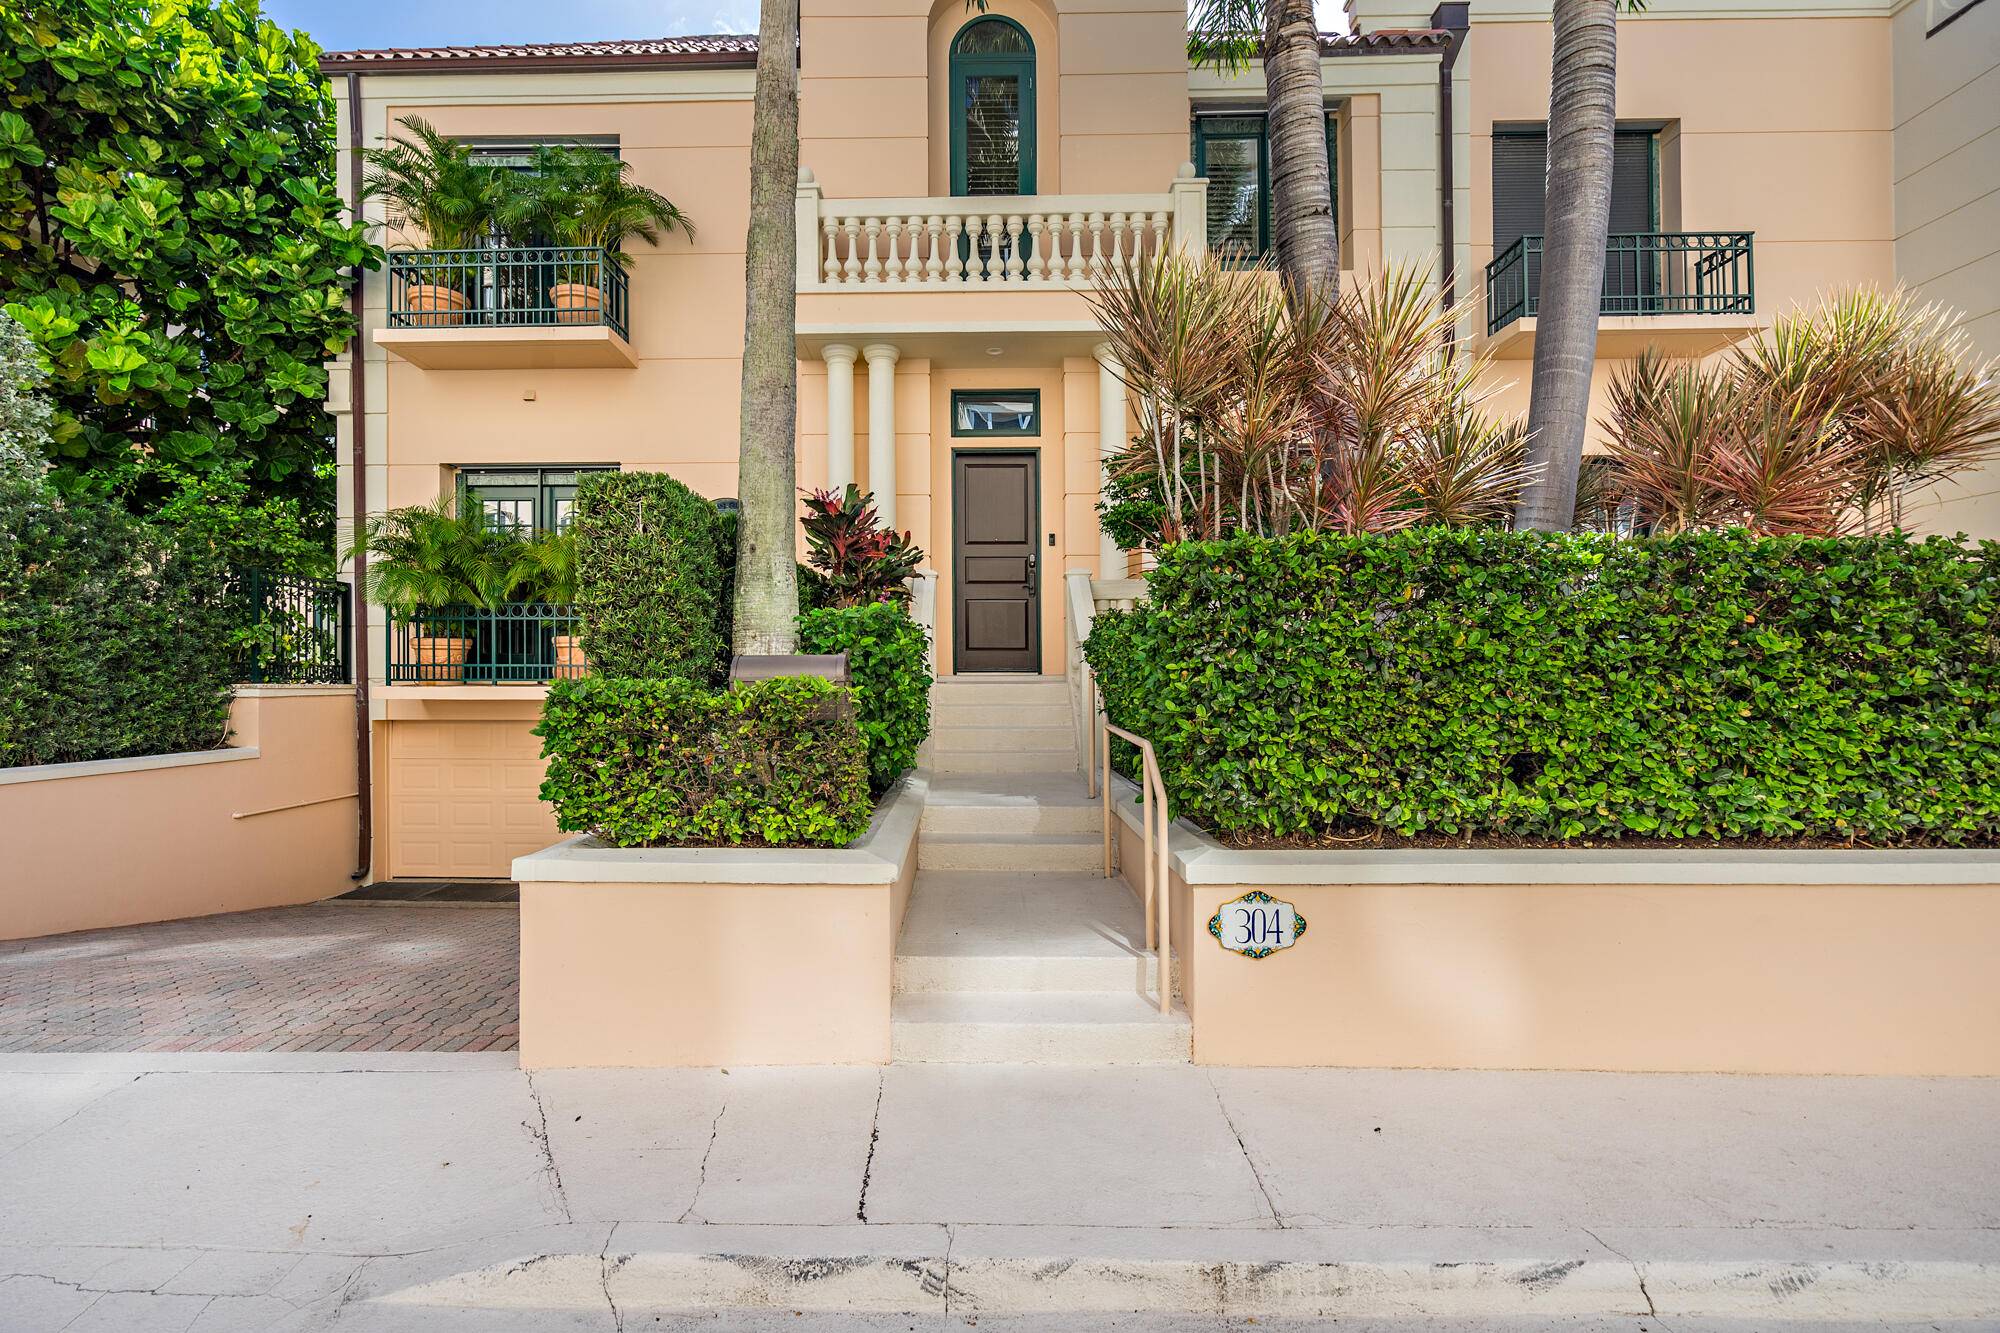 Welcome to 304 Atlantic Avenue, a rarely available 3 bedroom luxury townhome just steps away from the intracoastal.